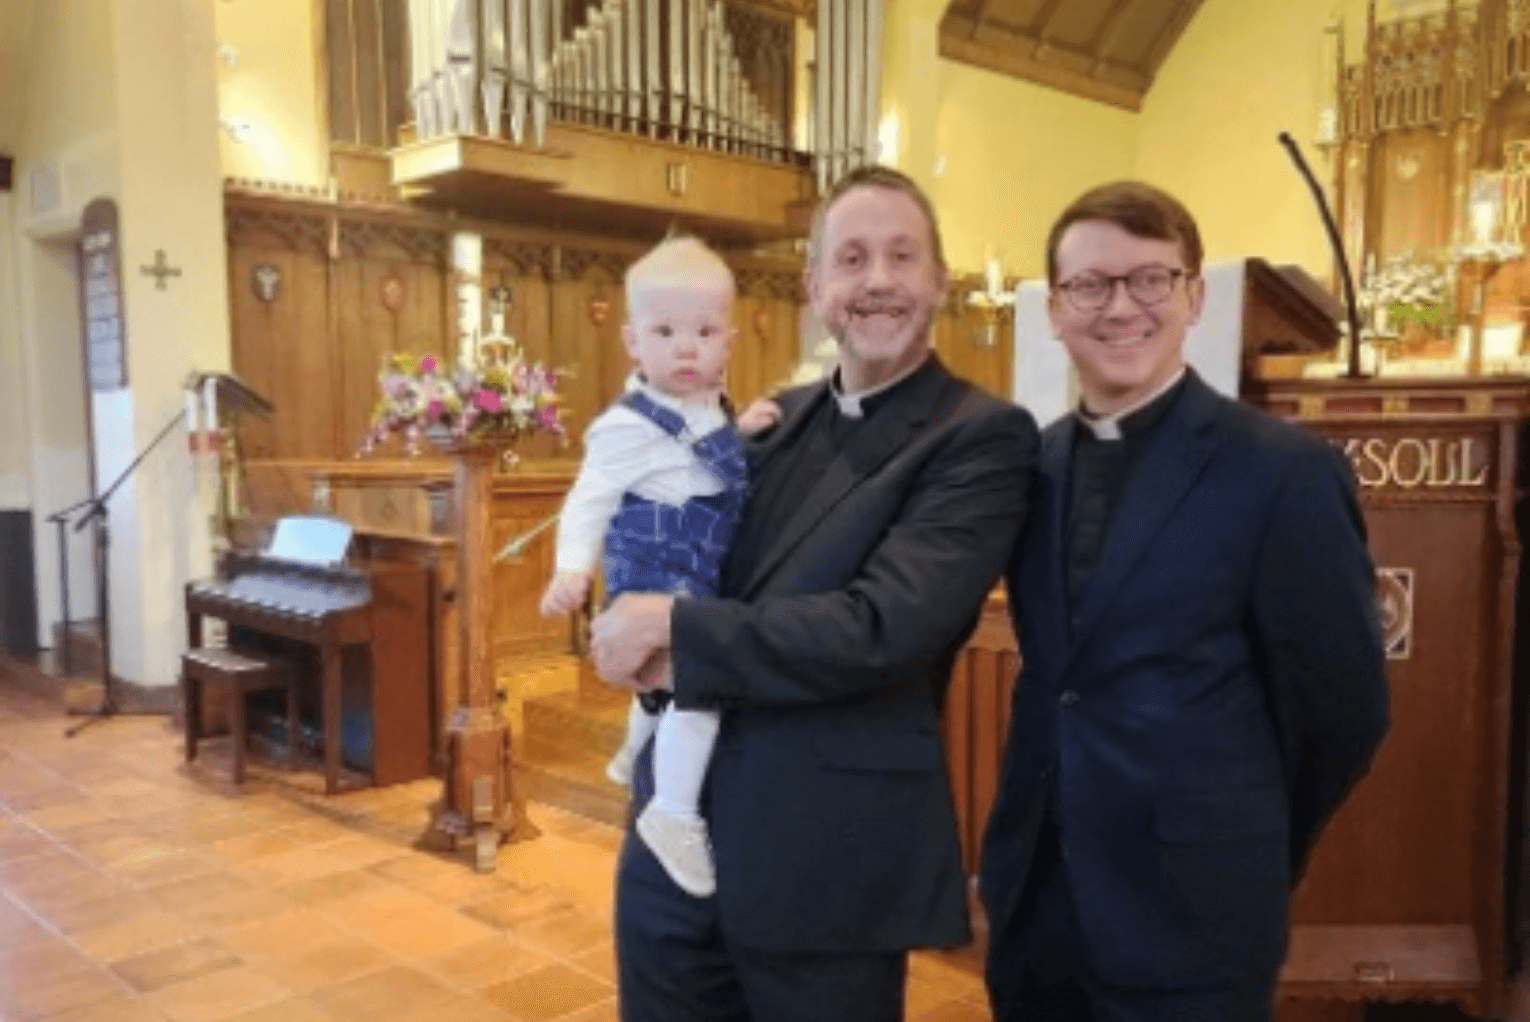 Apostate Priests Use Surrogate to Have Baby